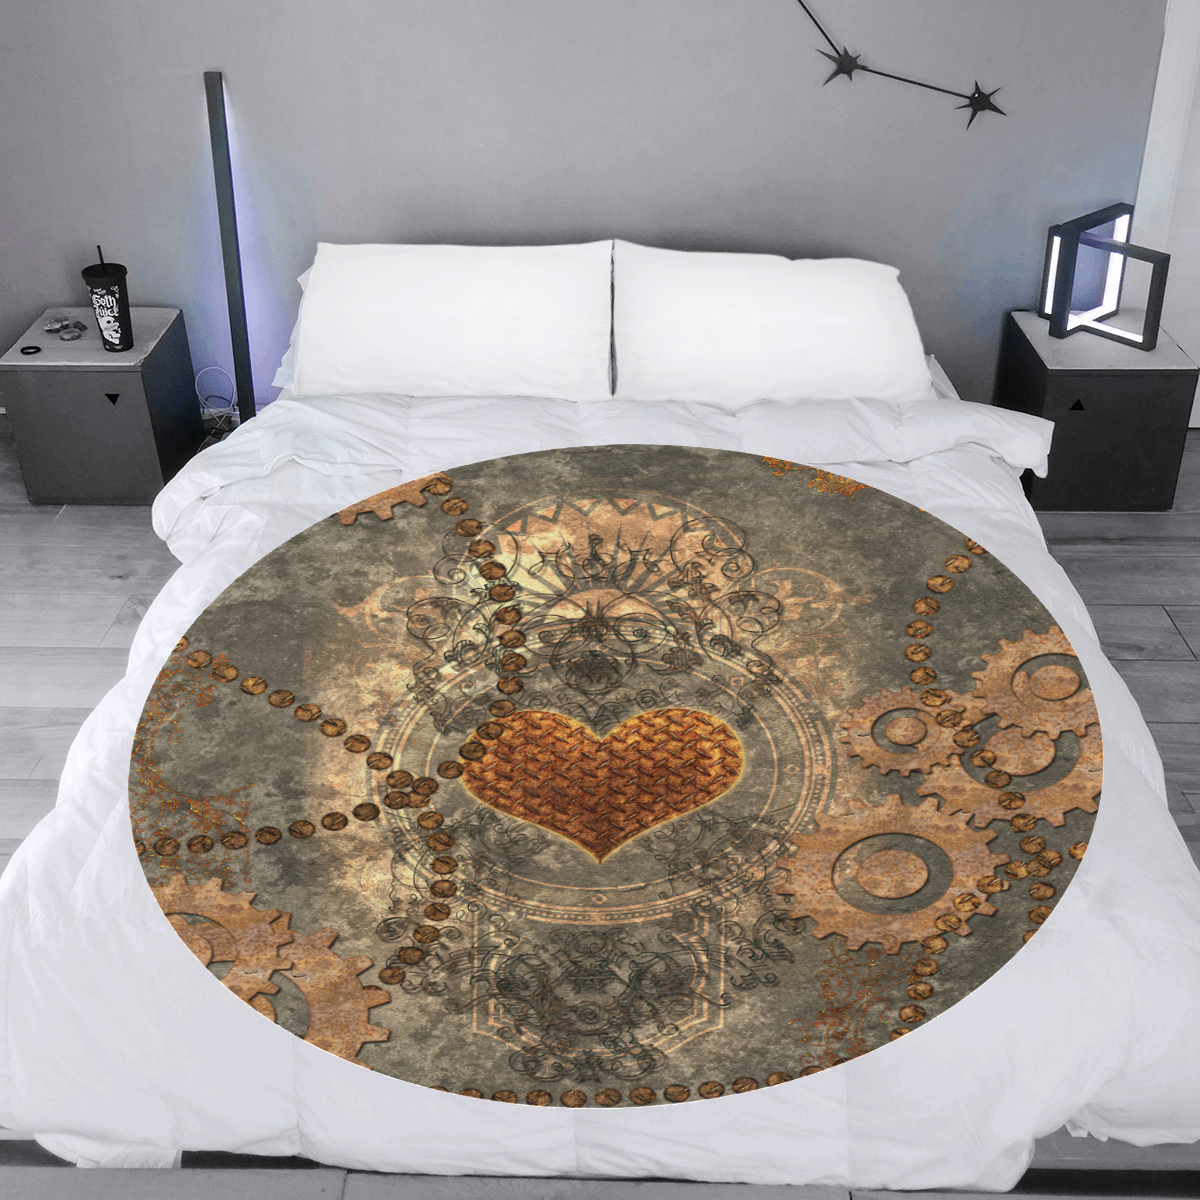 Steampuink, rusty heart with clocks and gears Circular Ultra-Soft Micro Fleece Blanket 60"